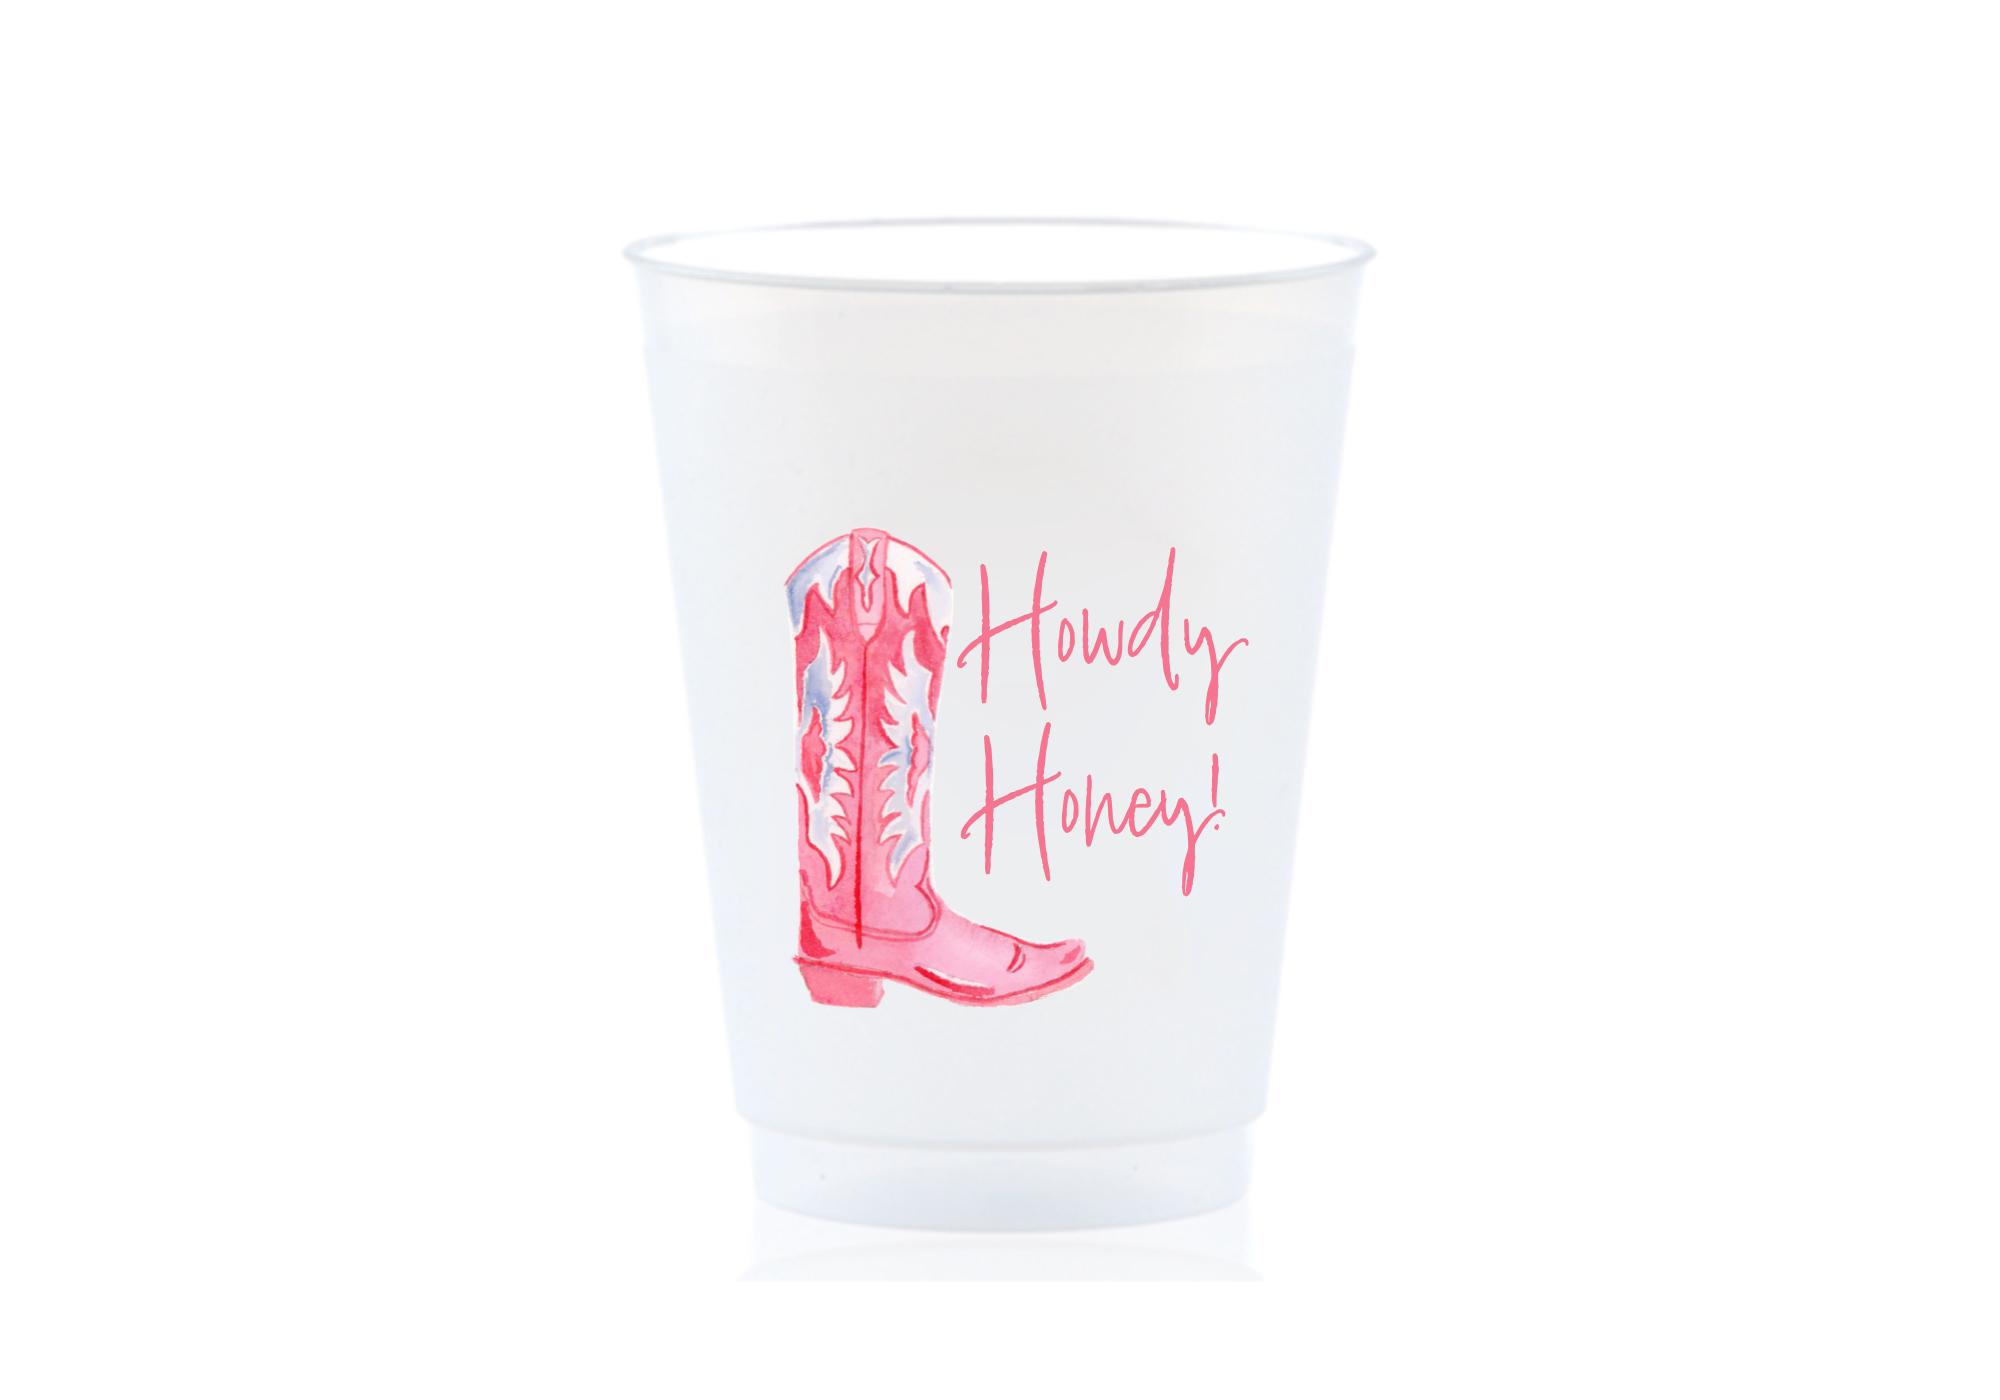 Howdy Honey Cups - Cowboy Boots Party Cups